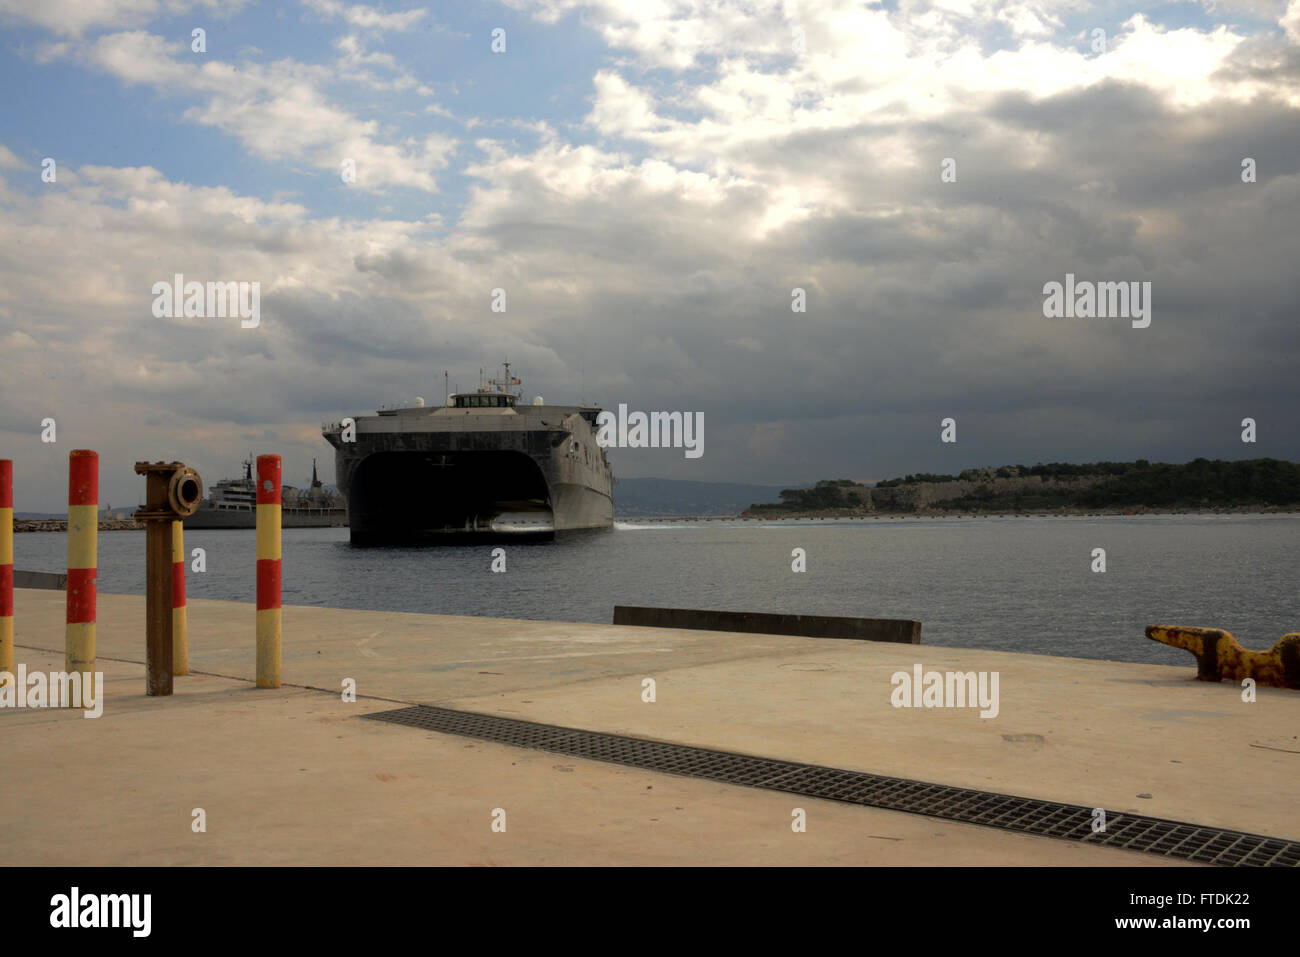 151230-N-IL474-086  SOUDA BAY, Greece (Dec. 30, 2015) – The Military Sealift Command Expeditionary Fast Transport ship, USNS Choctaw County (T-EPF 2),  arrives in Souda Bay for a scheduled port visit Dec. 30, 2015.  Choctaw County is the second of 10 vessels designed for rapid intra-theater transportation of troops and military equipment.  (U.S. Navy photo by Heather Judkins/Released) Stock Photo